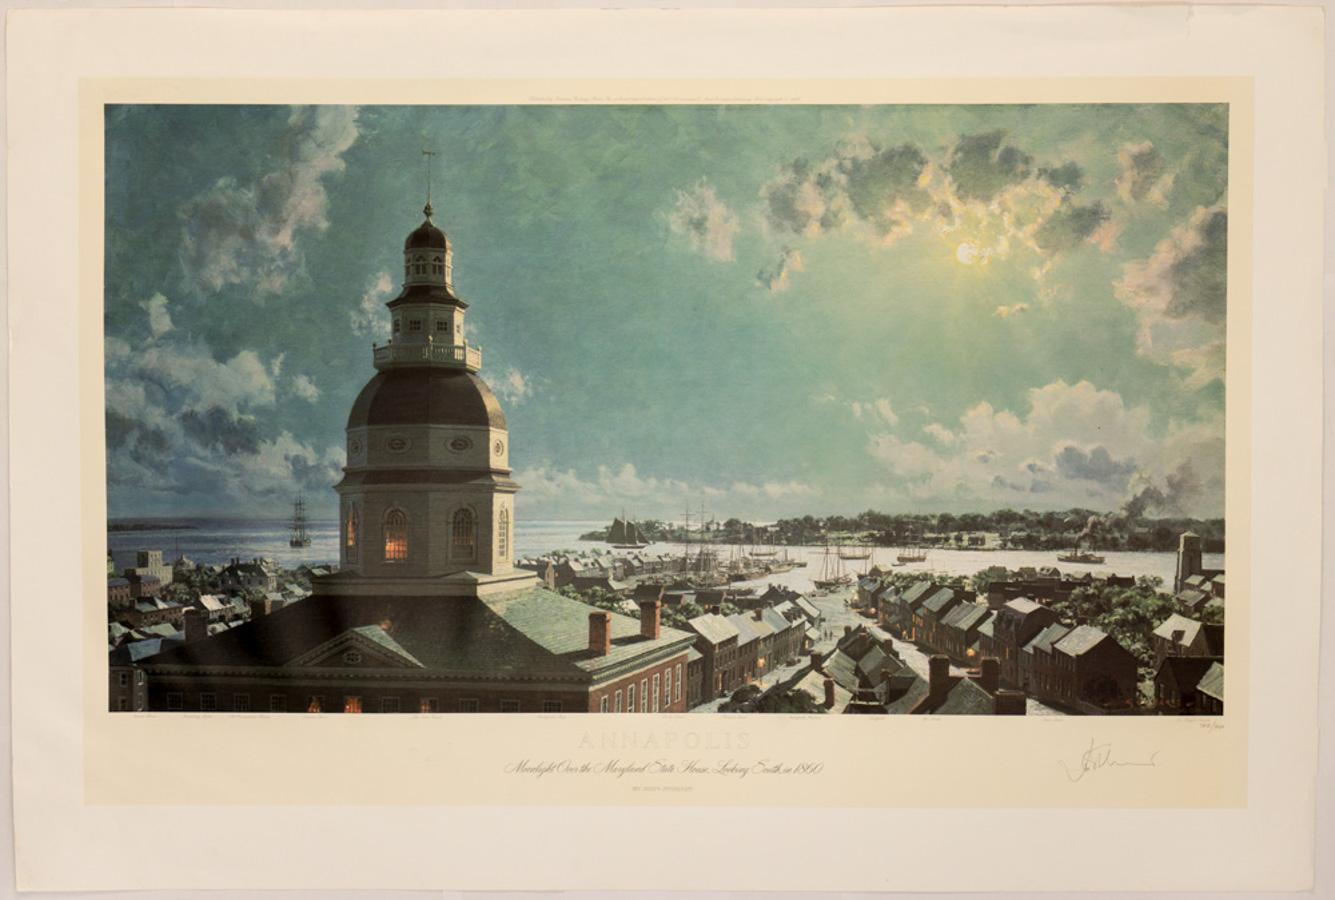 John Stobart Print - Annapolis. Moonlight Over the Maryland State House, Looking South, in 1860